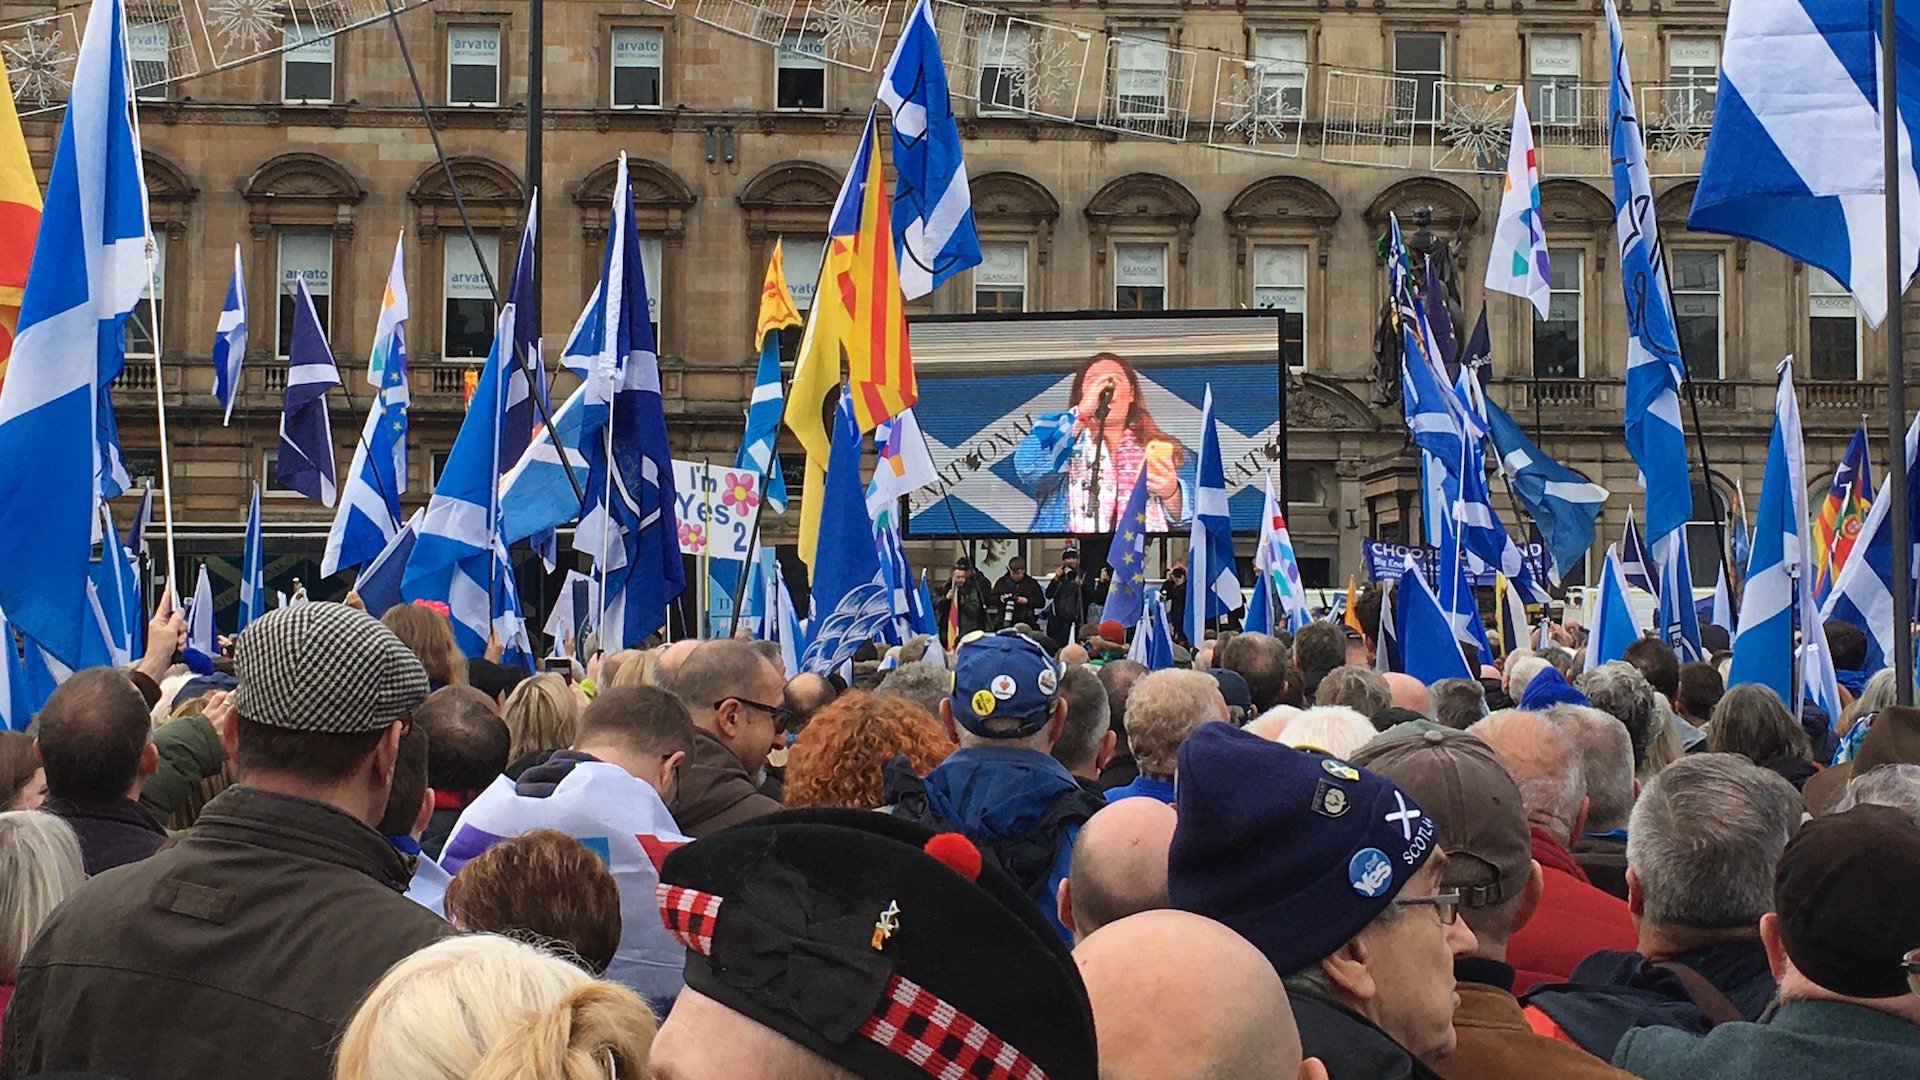 Scottish flags and crowds at a Scottish independence rally in george Square, Glasgow, in 2019